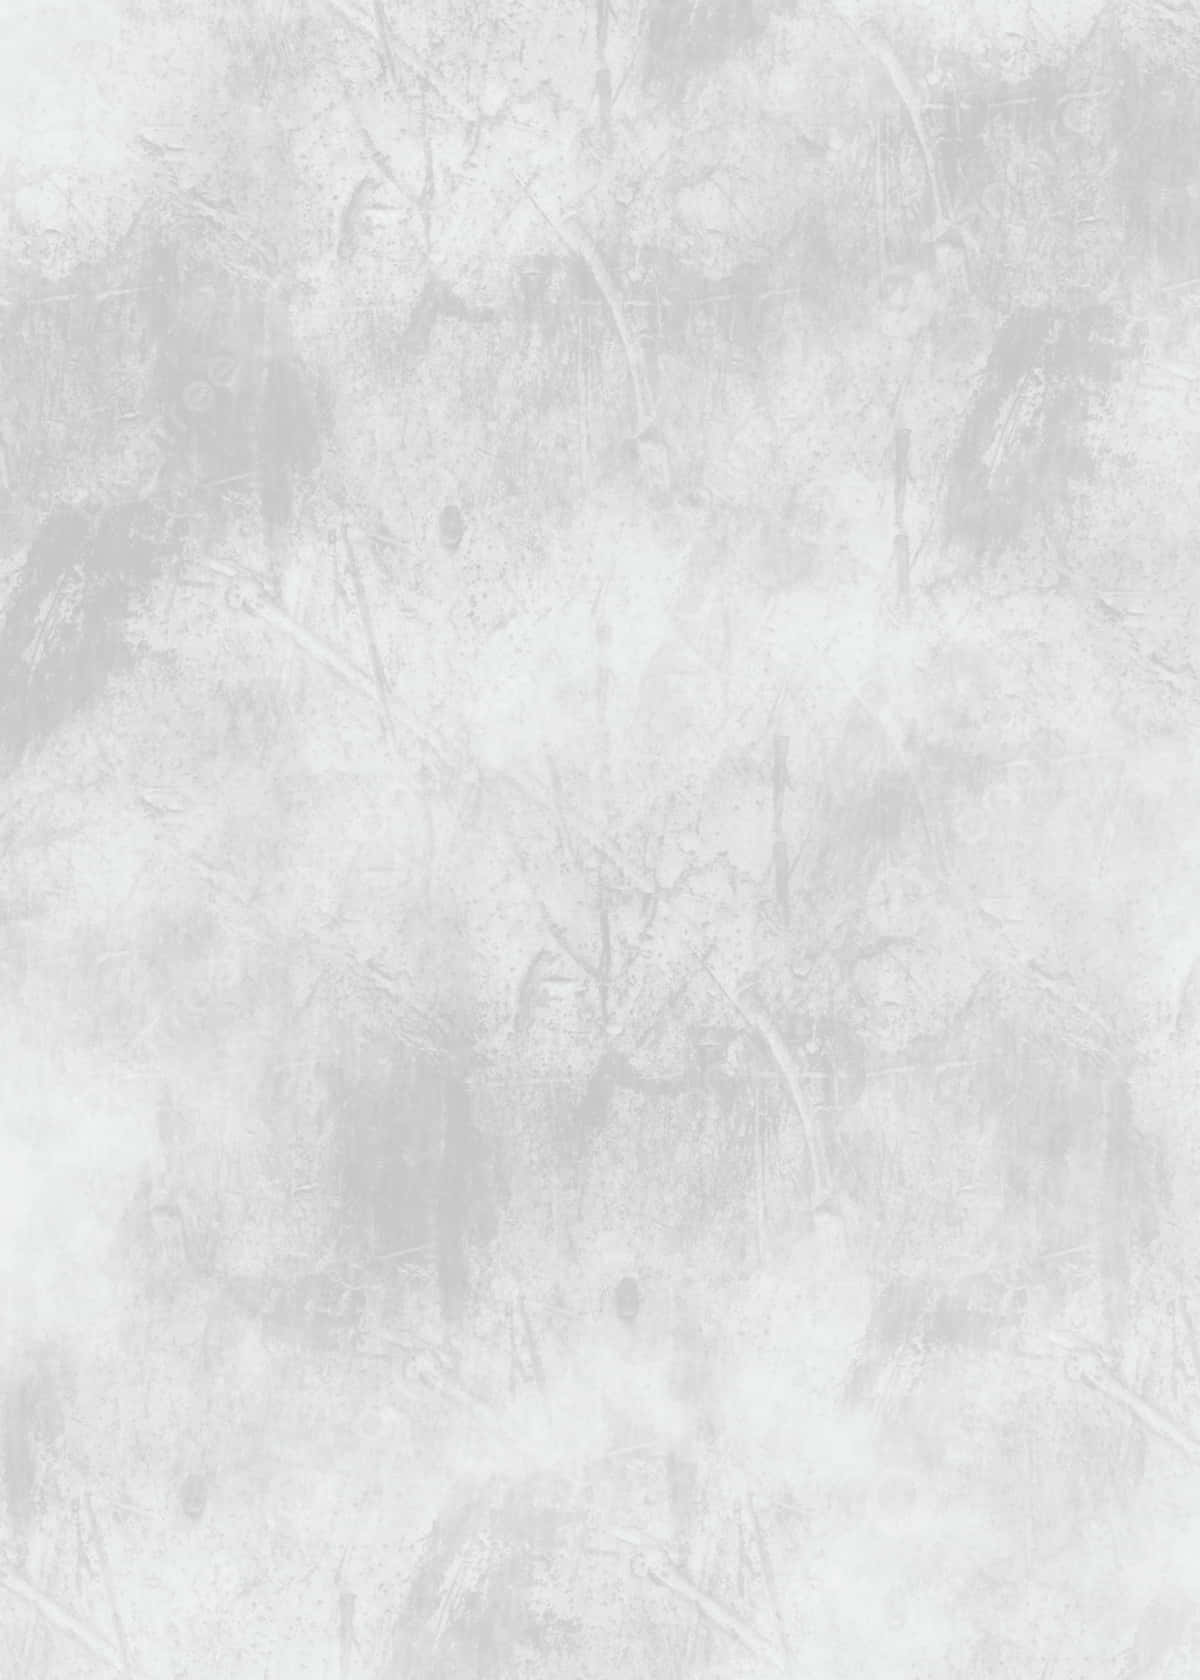 Download A White And Gray Background With A Lot Of Texture | Wallpapers.com